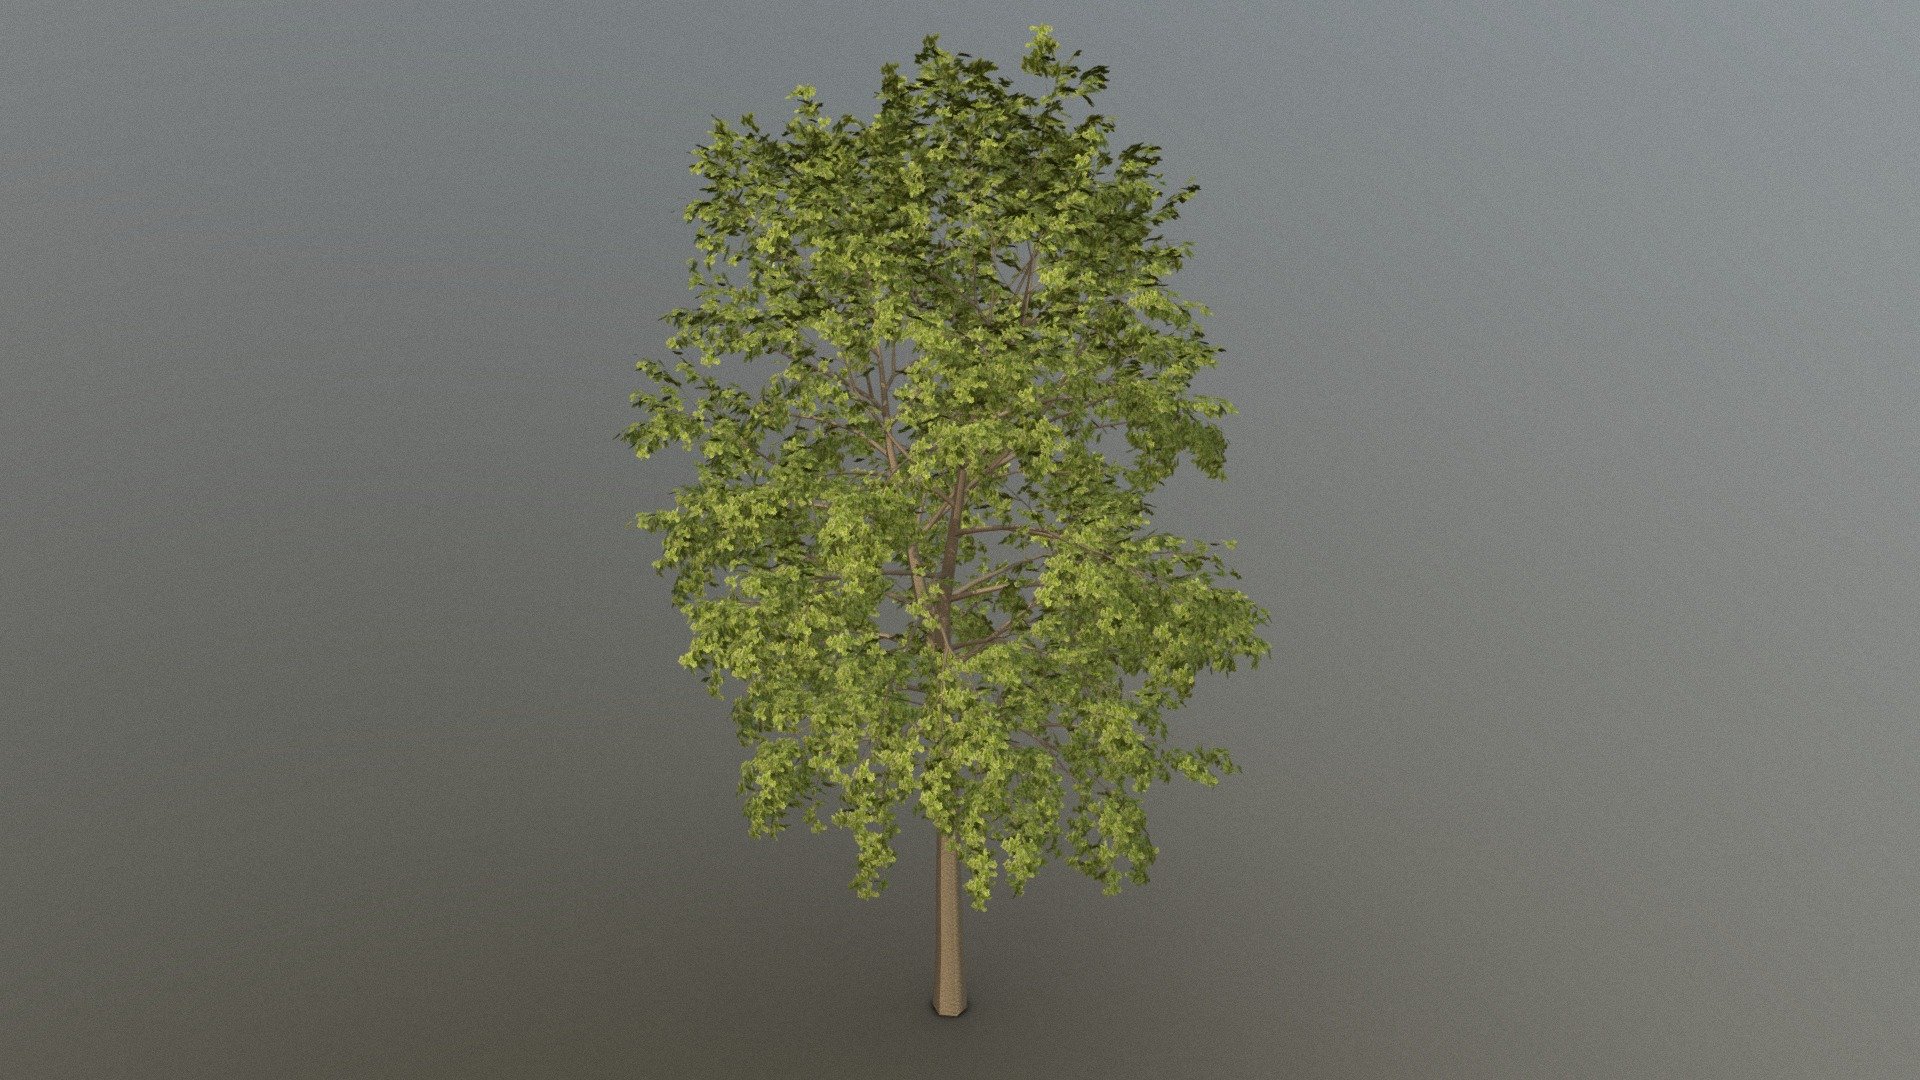 This model is made with blender. It is free to download, you can use it in your projects 3d model